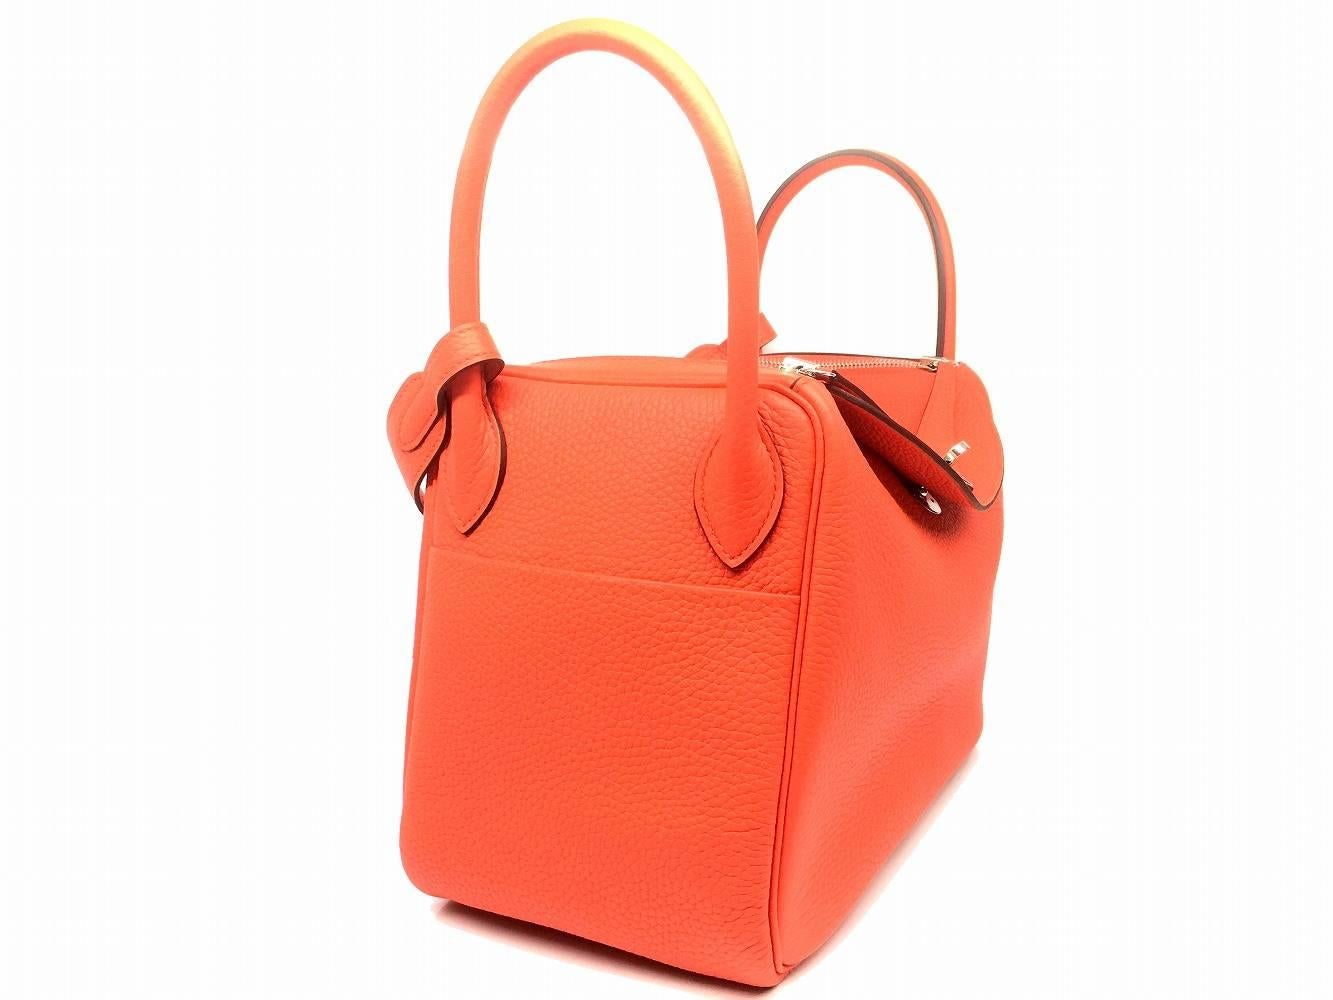 Color: Orange / Orange Poppy (designer color)

Material: Clemence Leather

Condition: Rank S 
Overall: Almost New
Surface: Good
Corners: Good
Edges: Good
Handles/Straps: Good
Hardware: Good

Dimension: W30 × H21 × D15cm（W11.8" × H8.2" ×